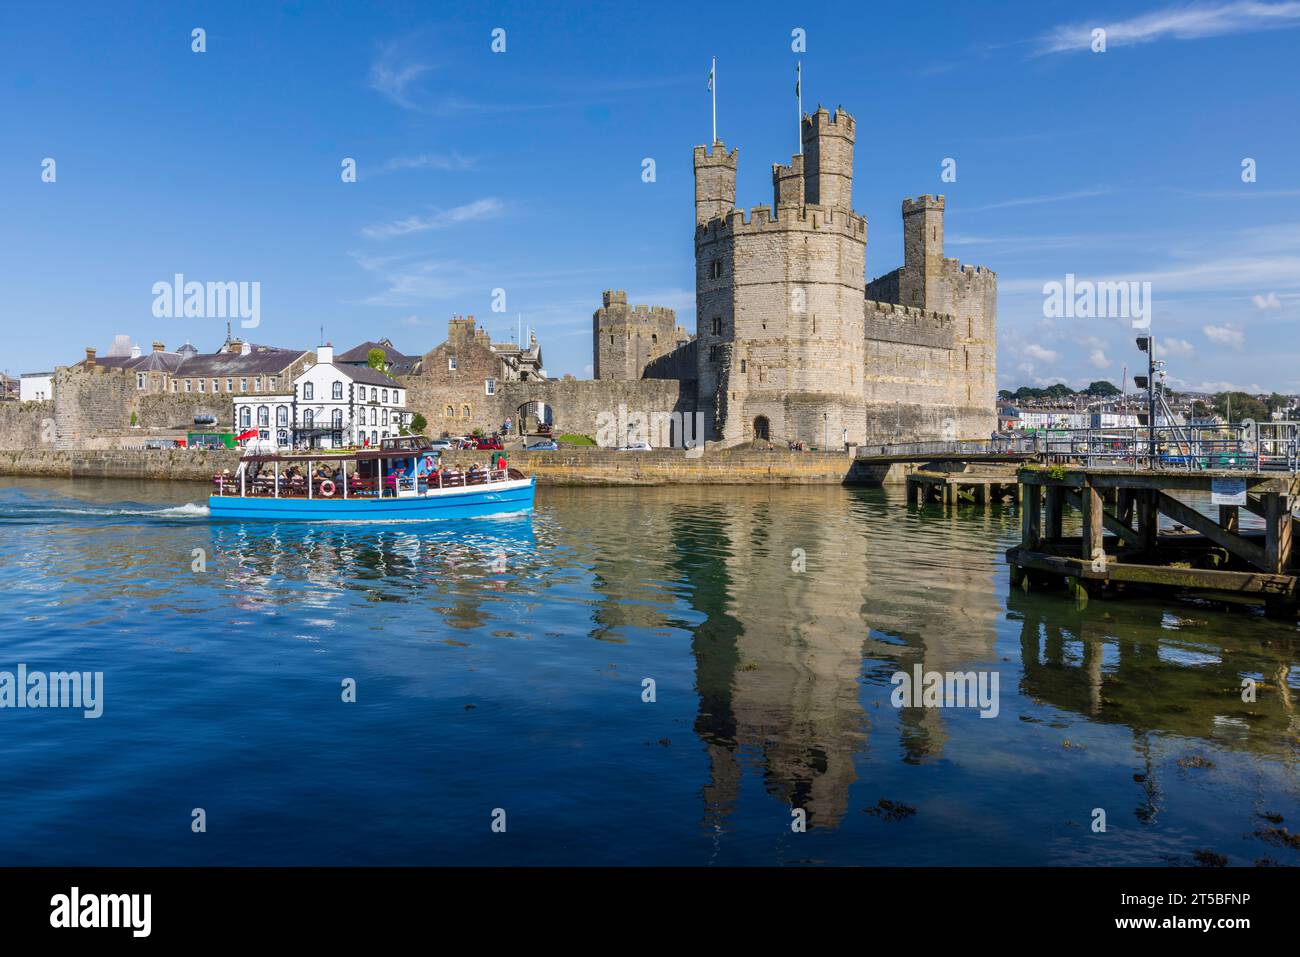 Caernarfon Castle, a UNESCO World Heritage Site and one of the most popular tourist destinations in Wales. Stock Photo